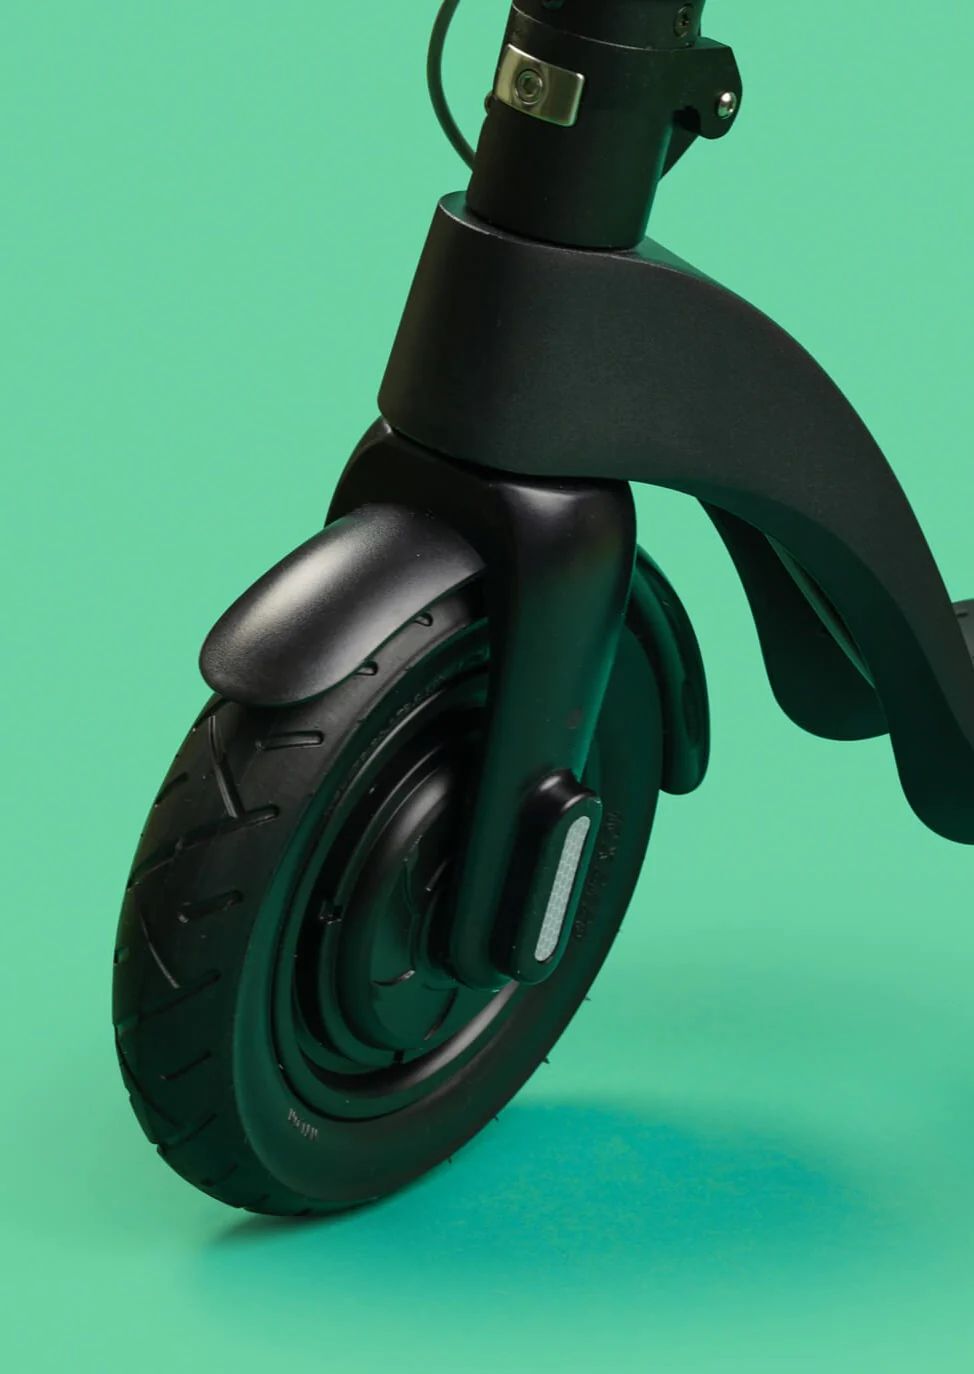 LEVY Electric Scooters | U-Lock